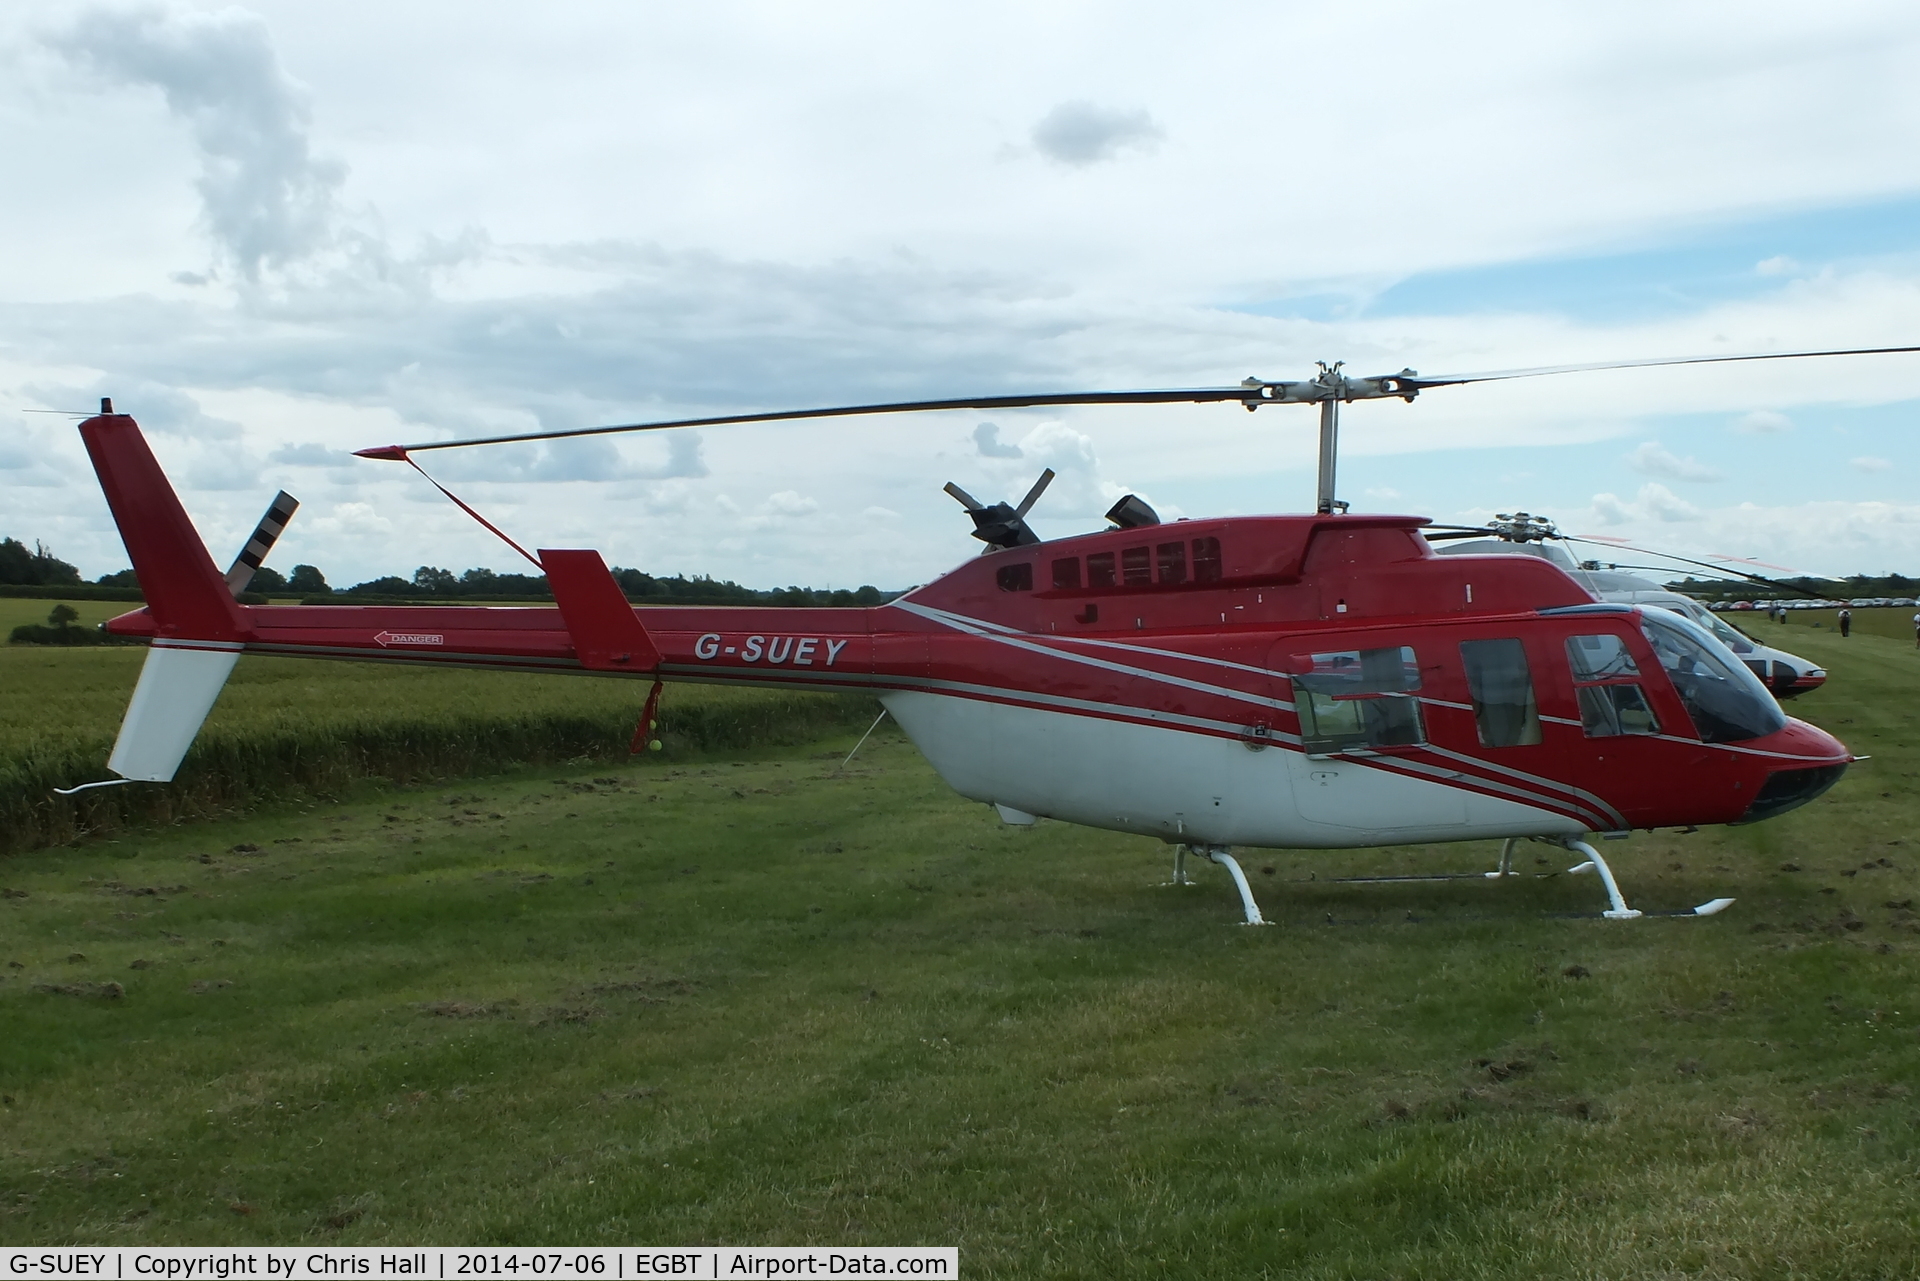 G-SUEY, 1981 Bell 206L-1 LongRanger II C/N 45612, ferrying race fans to the British F1 Grand Prix at Silverstone